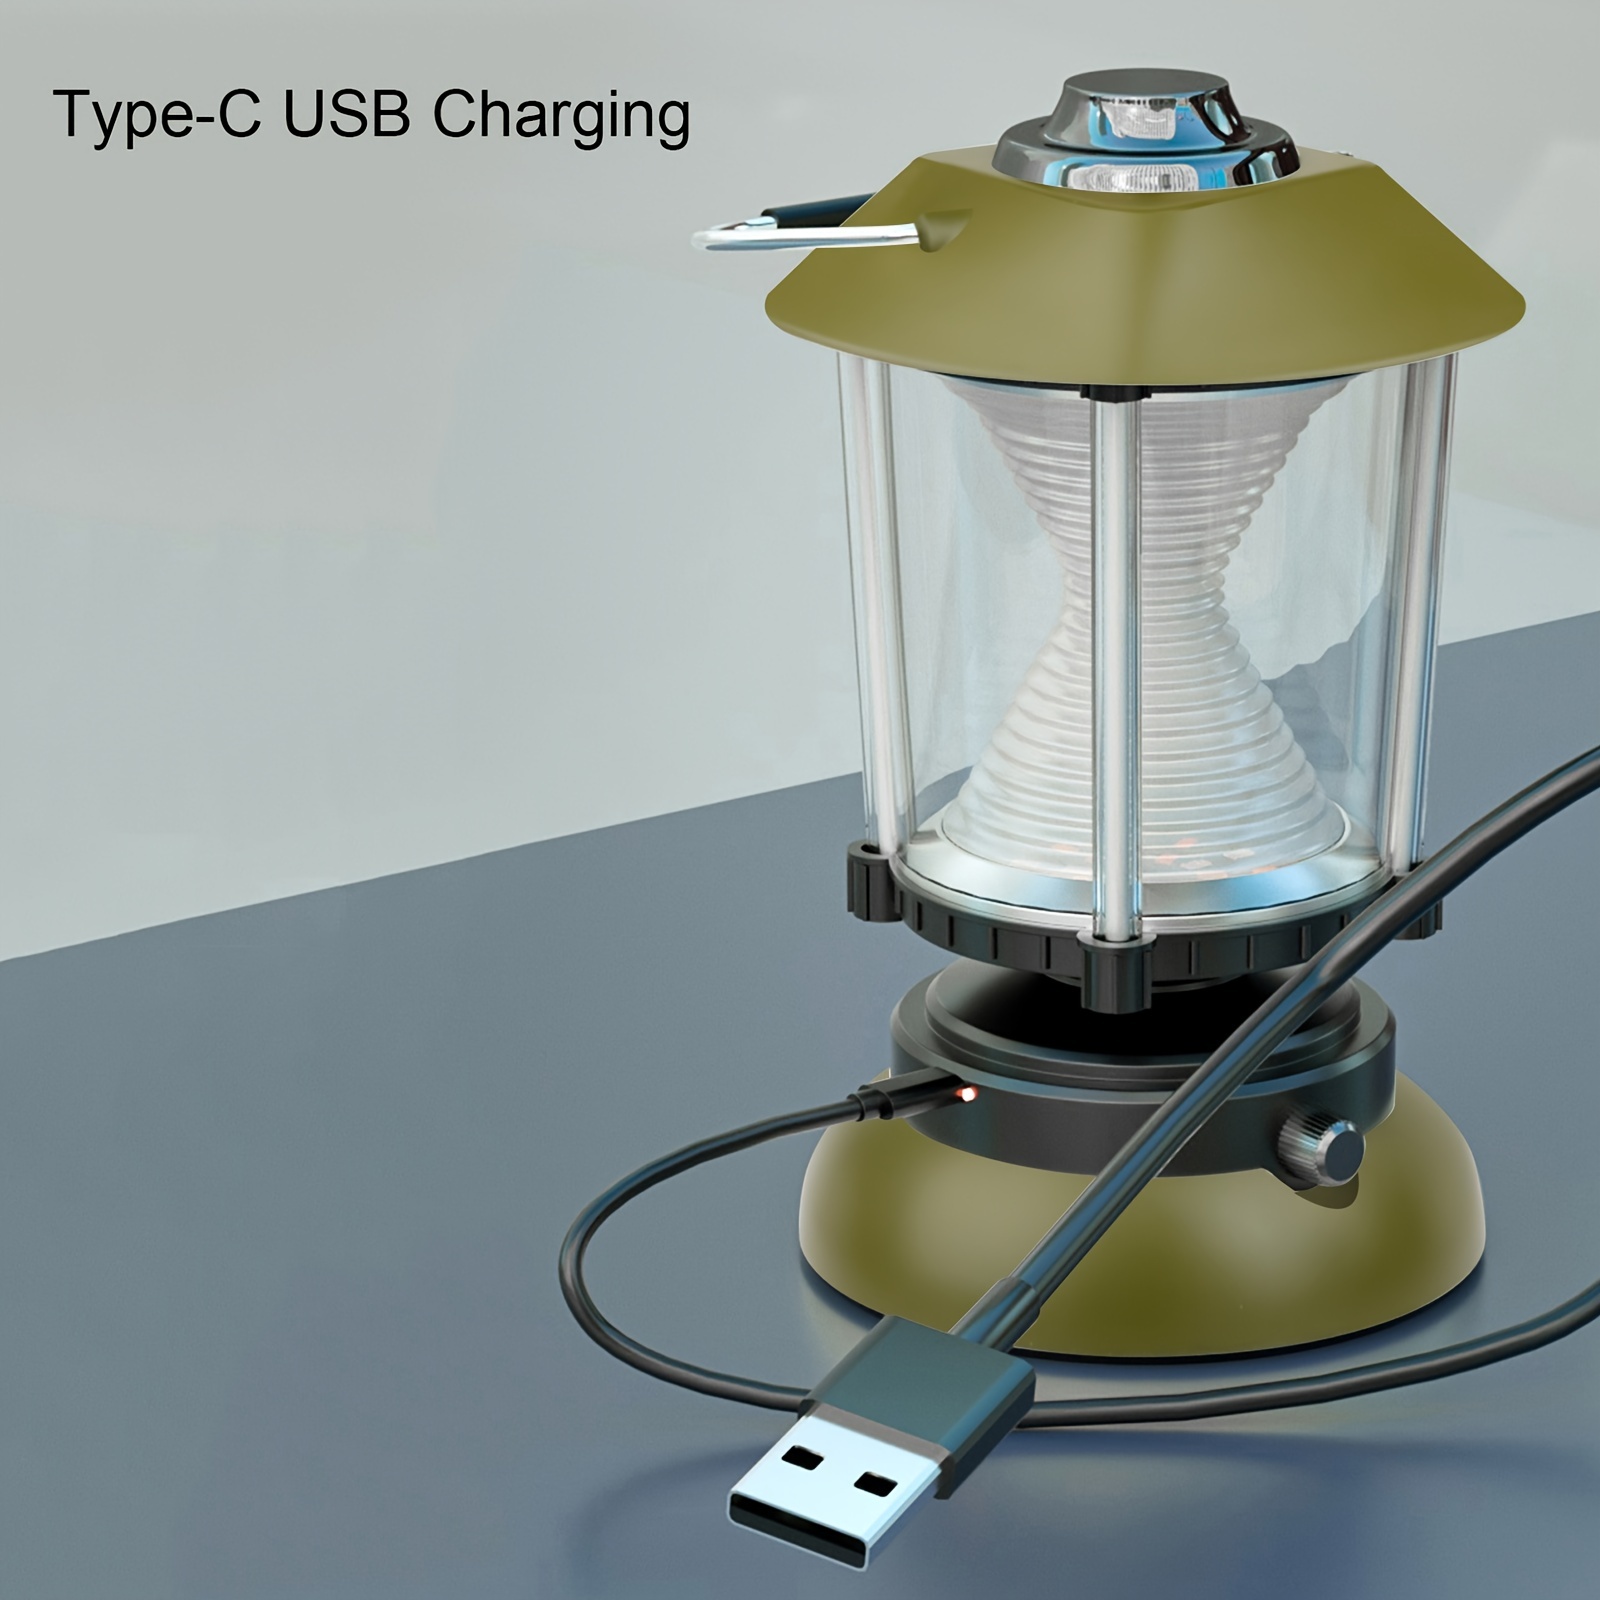 Powerful Camping Lamp Warm Light, Rechargeable Led Lantern